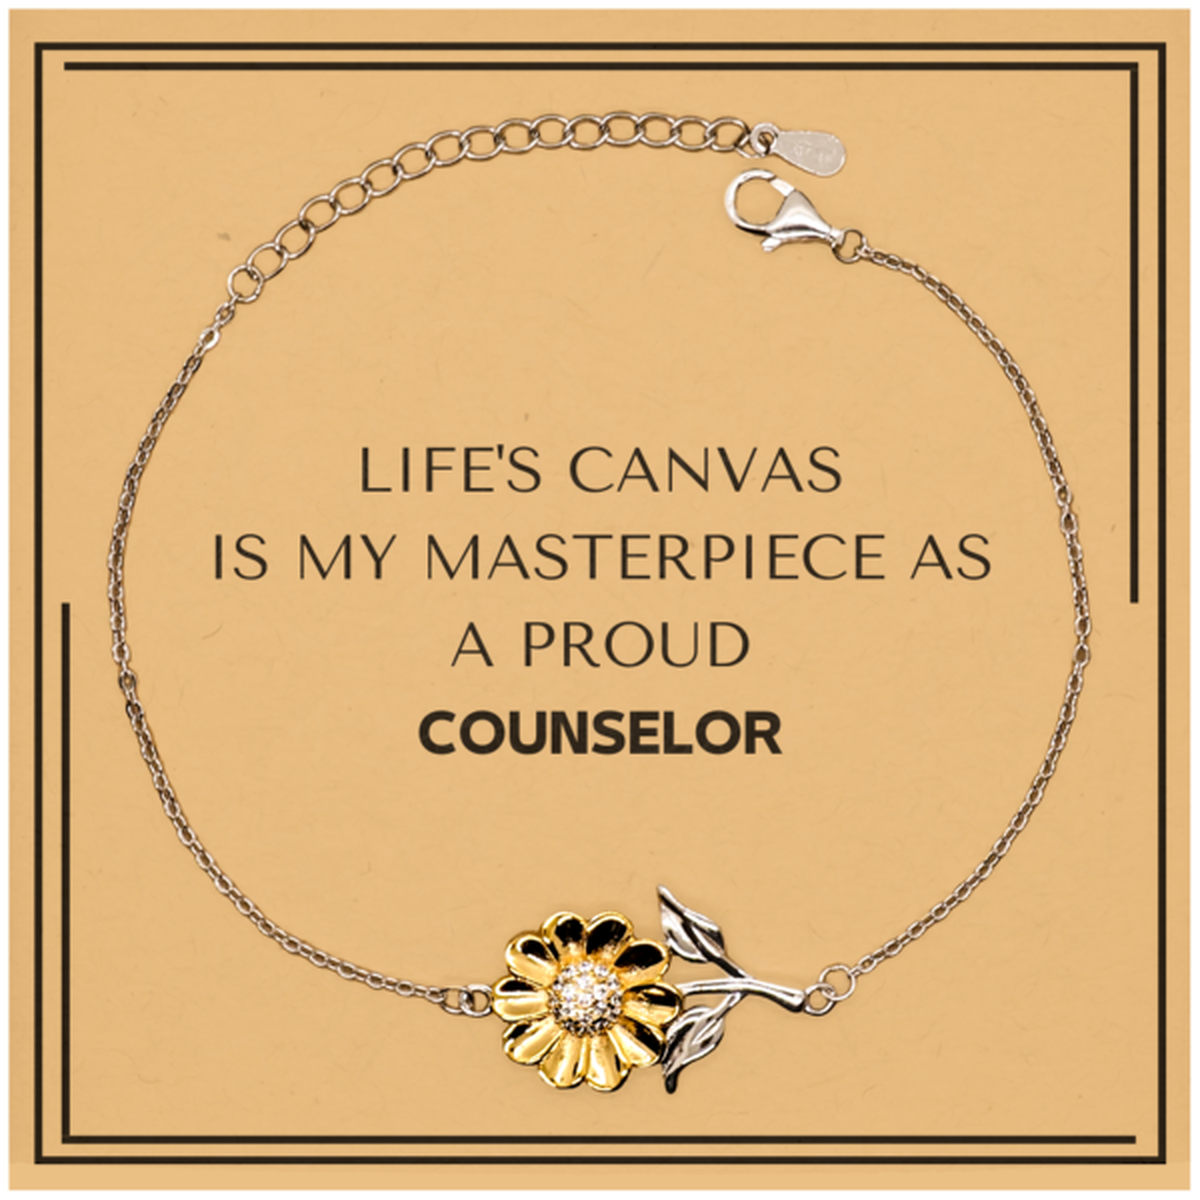 Proud Counselor Gifts, Life's canvas is my masterpiece, Epic Birthday Christmas Unique Sunflower Bracelet For Counselor, Coworkers, Men, Women, Friends